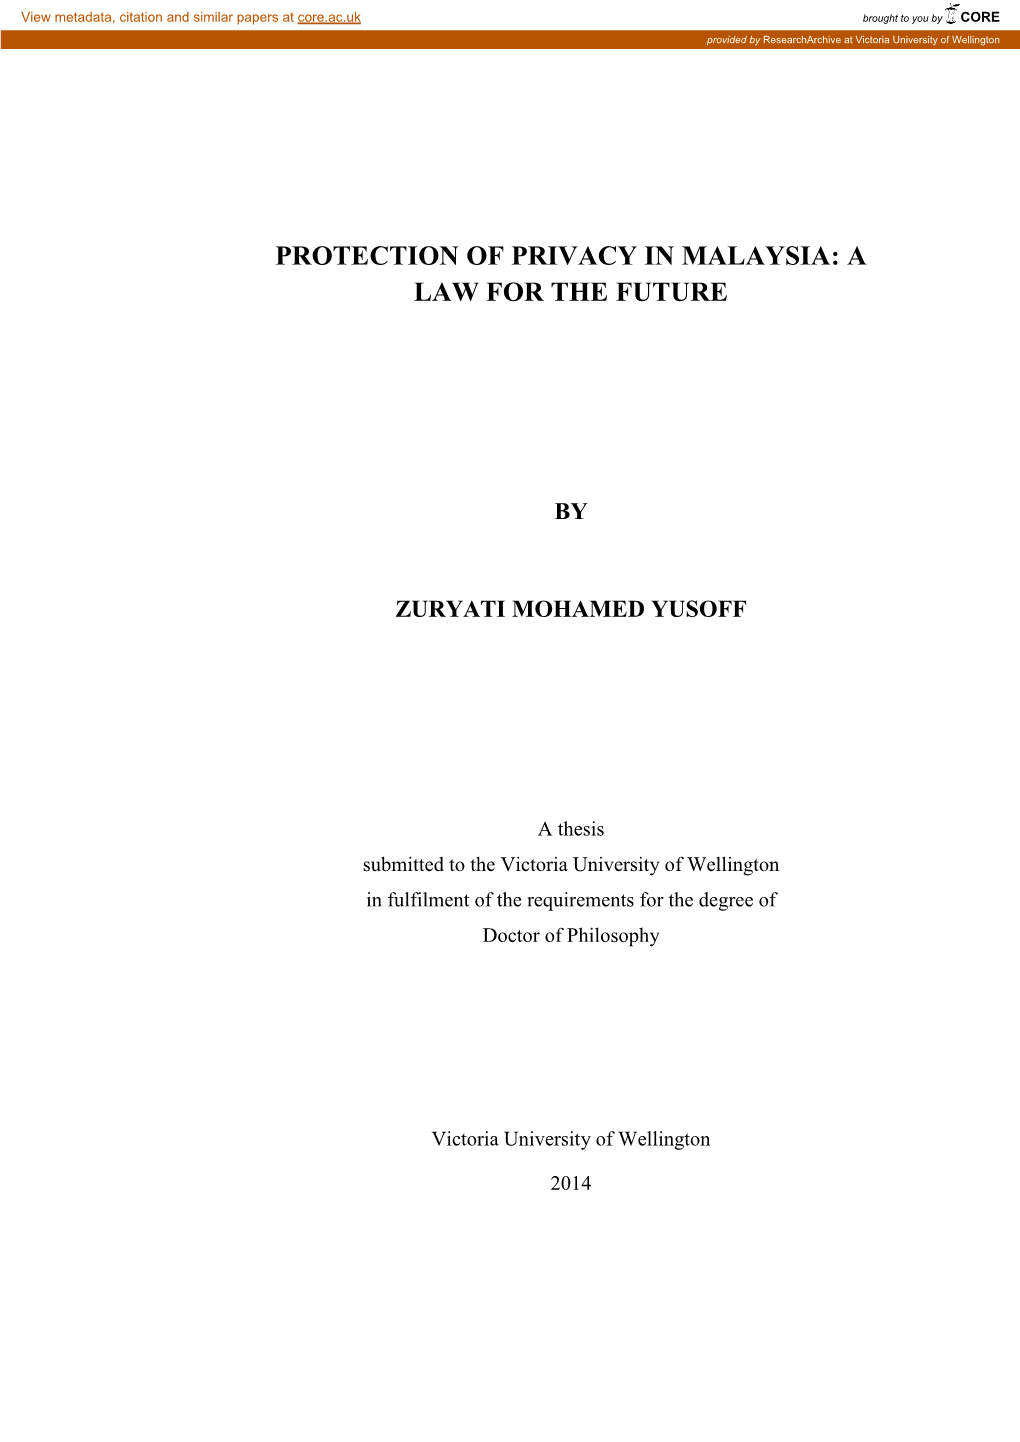 Protection of Privacy in Malaysia: a Law for the Future